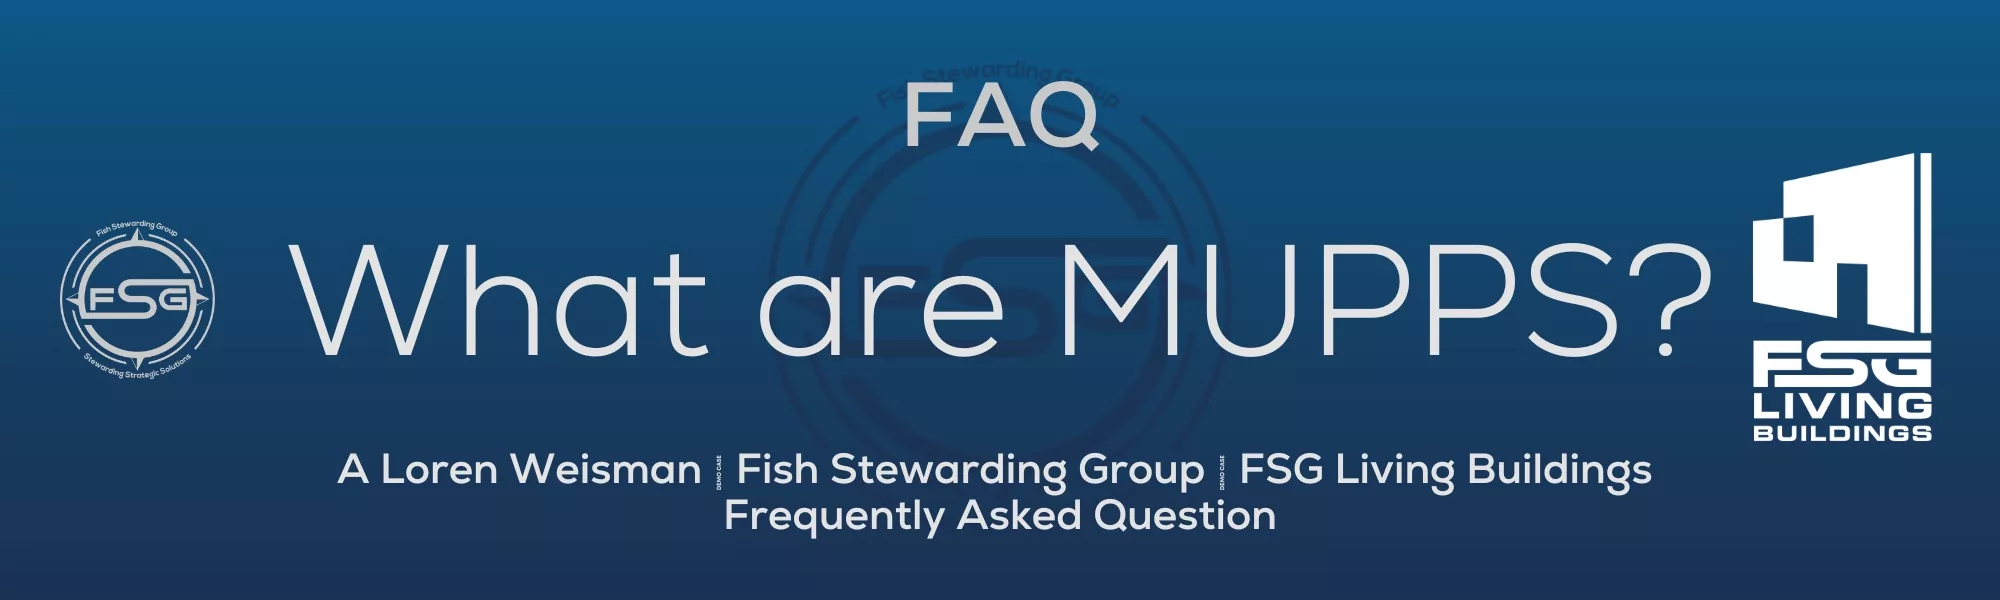 What Are FSG Living Buildings MUPPS FAQ?